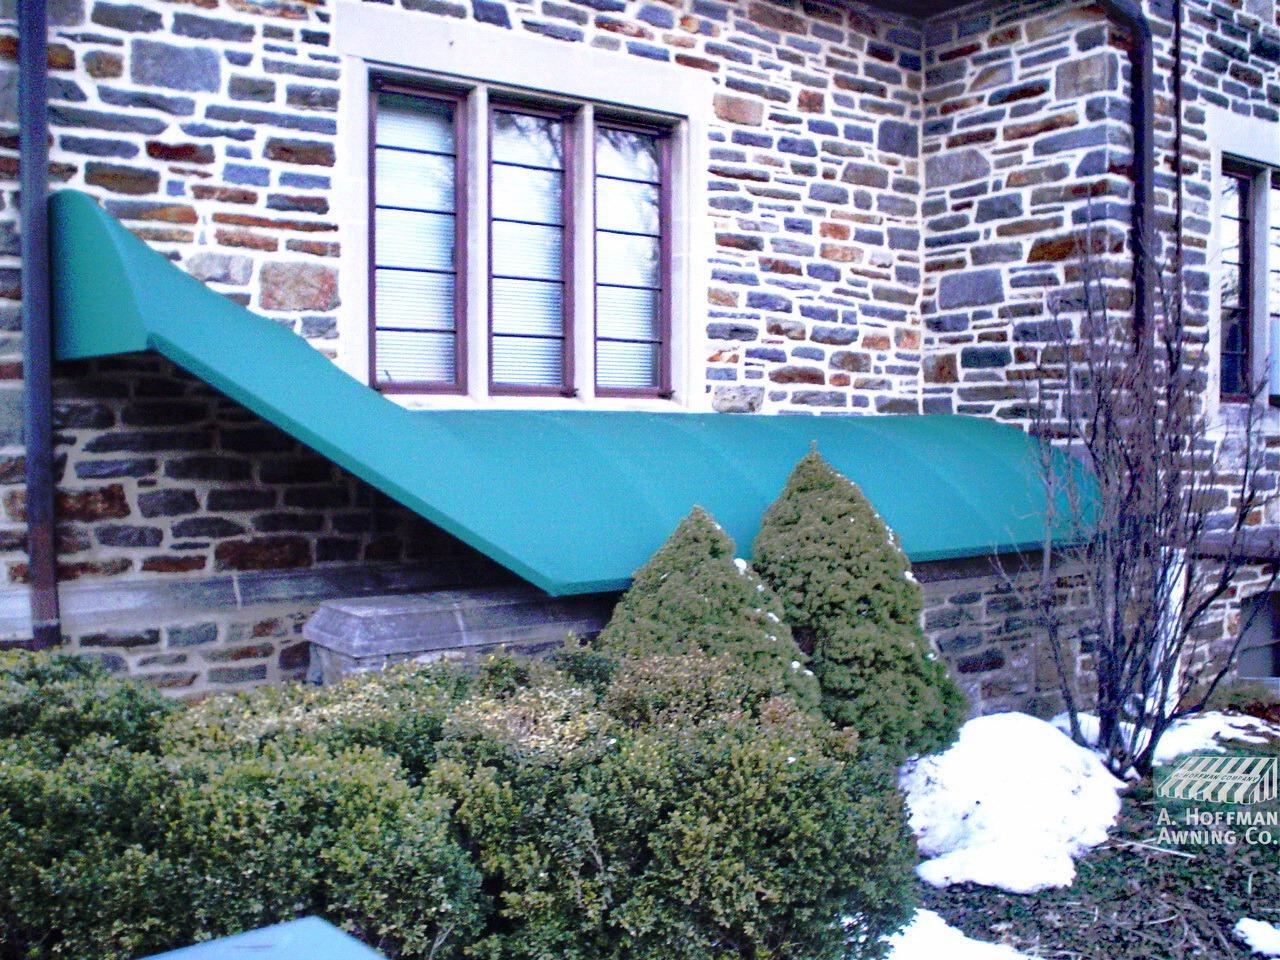 A. Hoffman Awning Co Photo